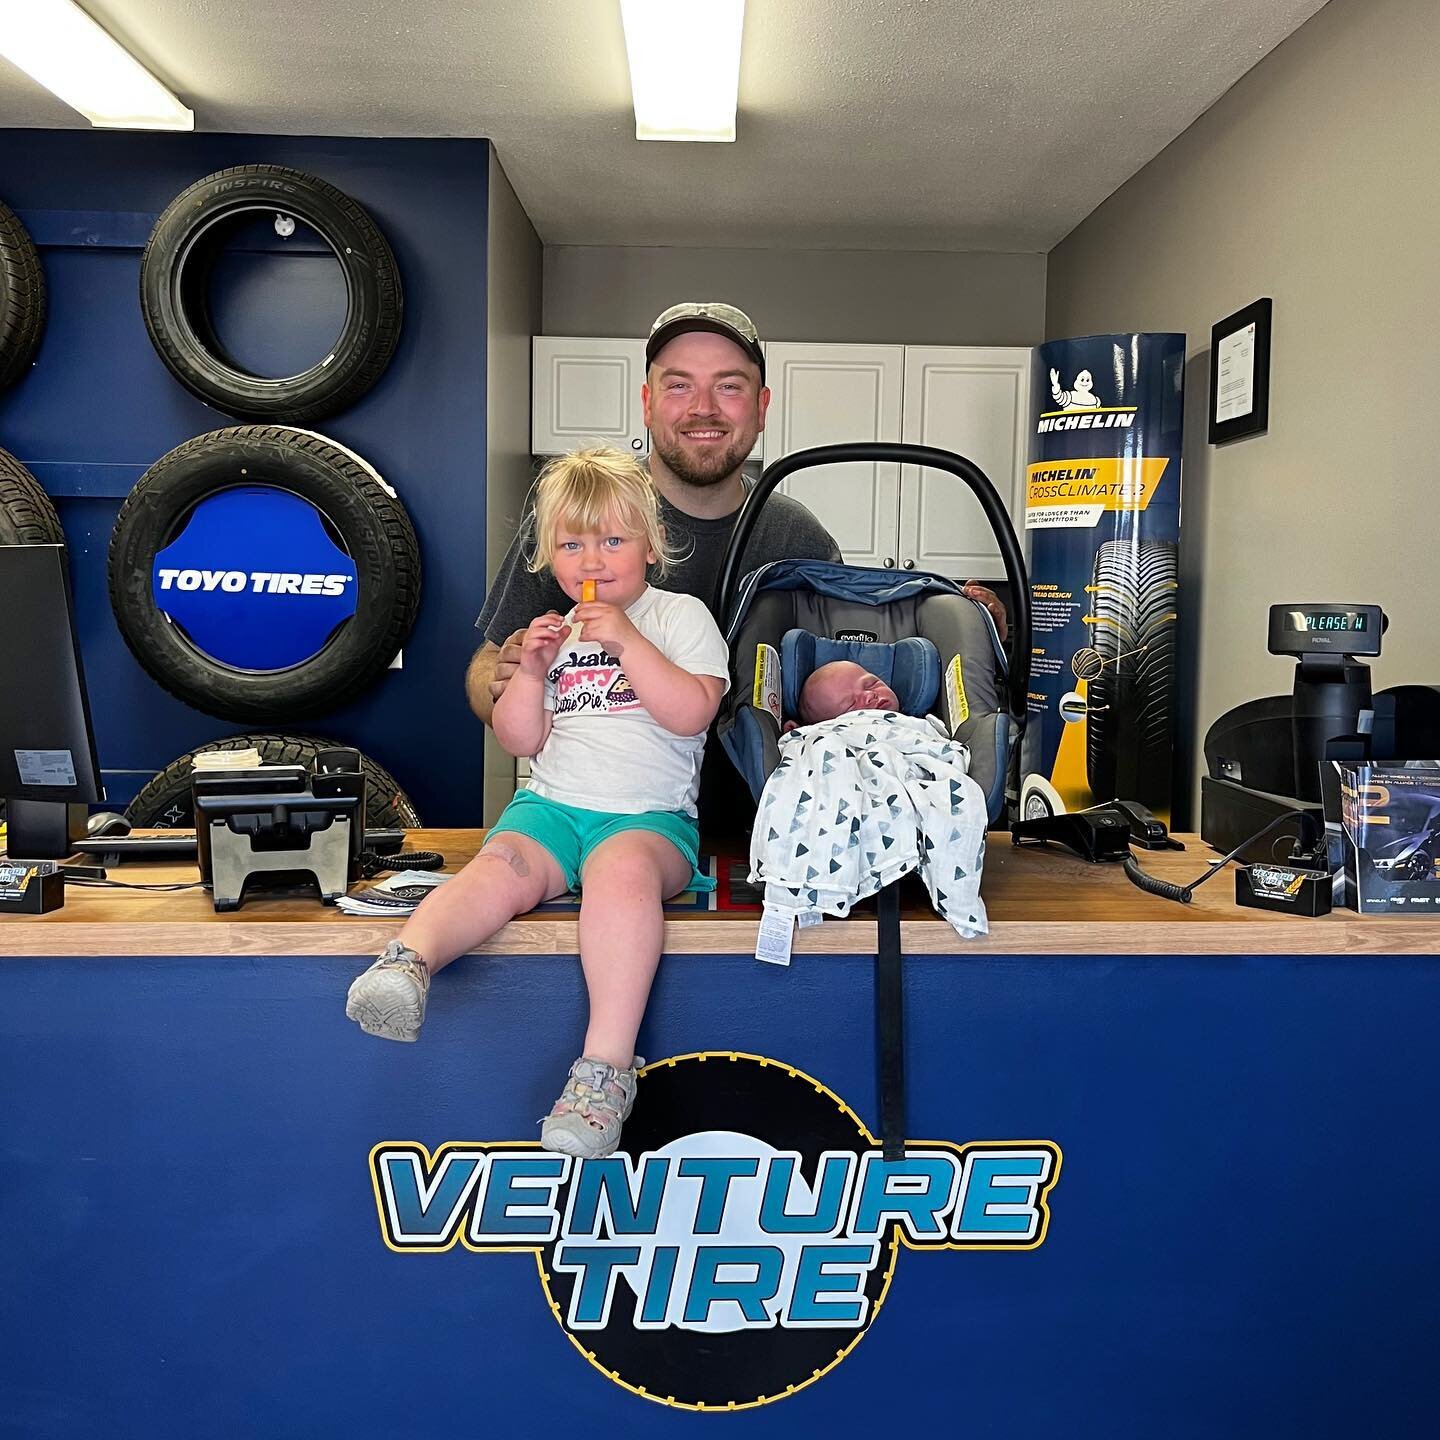 Our family at Venture Tire has grown! Thanks for your flexibility in booking appointments these last couple weeks as we prepared to welcome this little one. As a small family business, your support is what keeps us going! #venturetire #weyburnsask